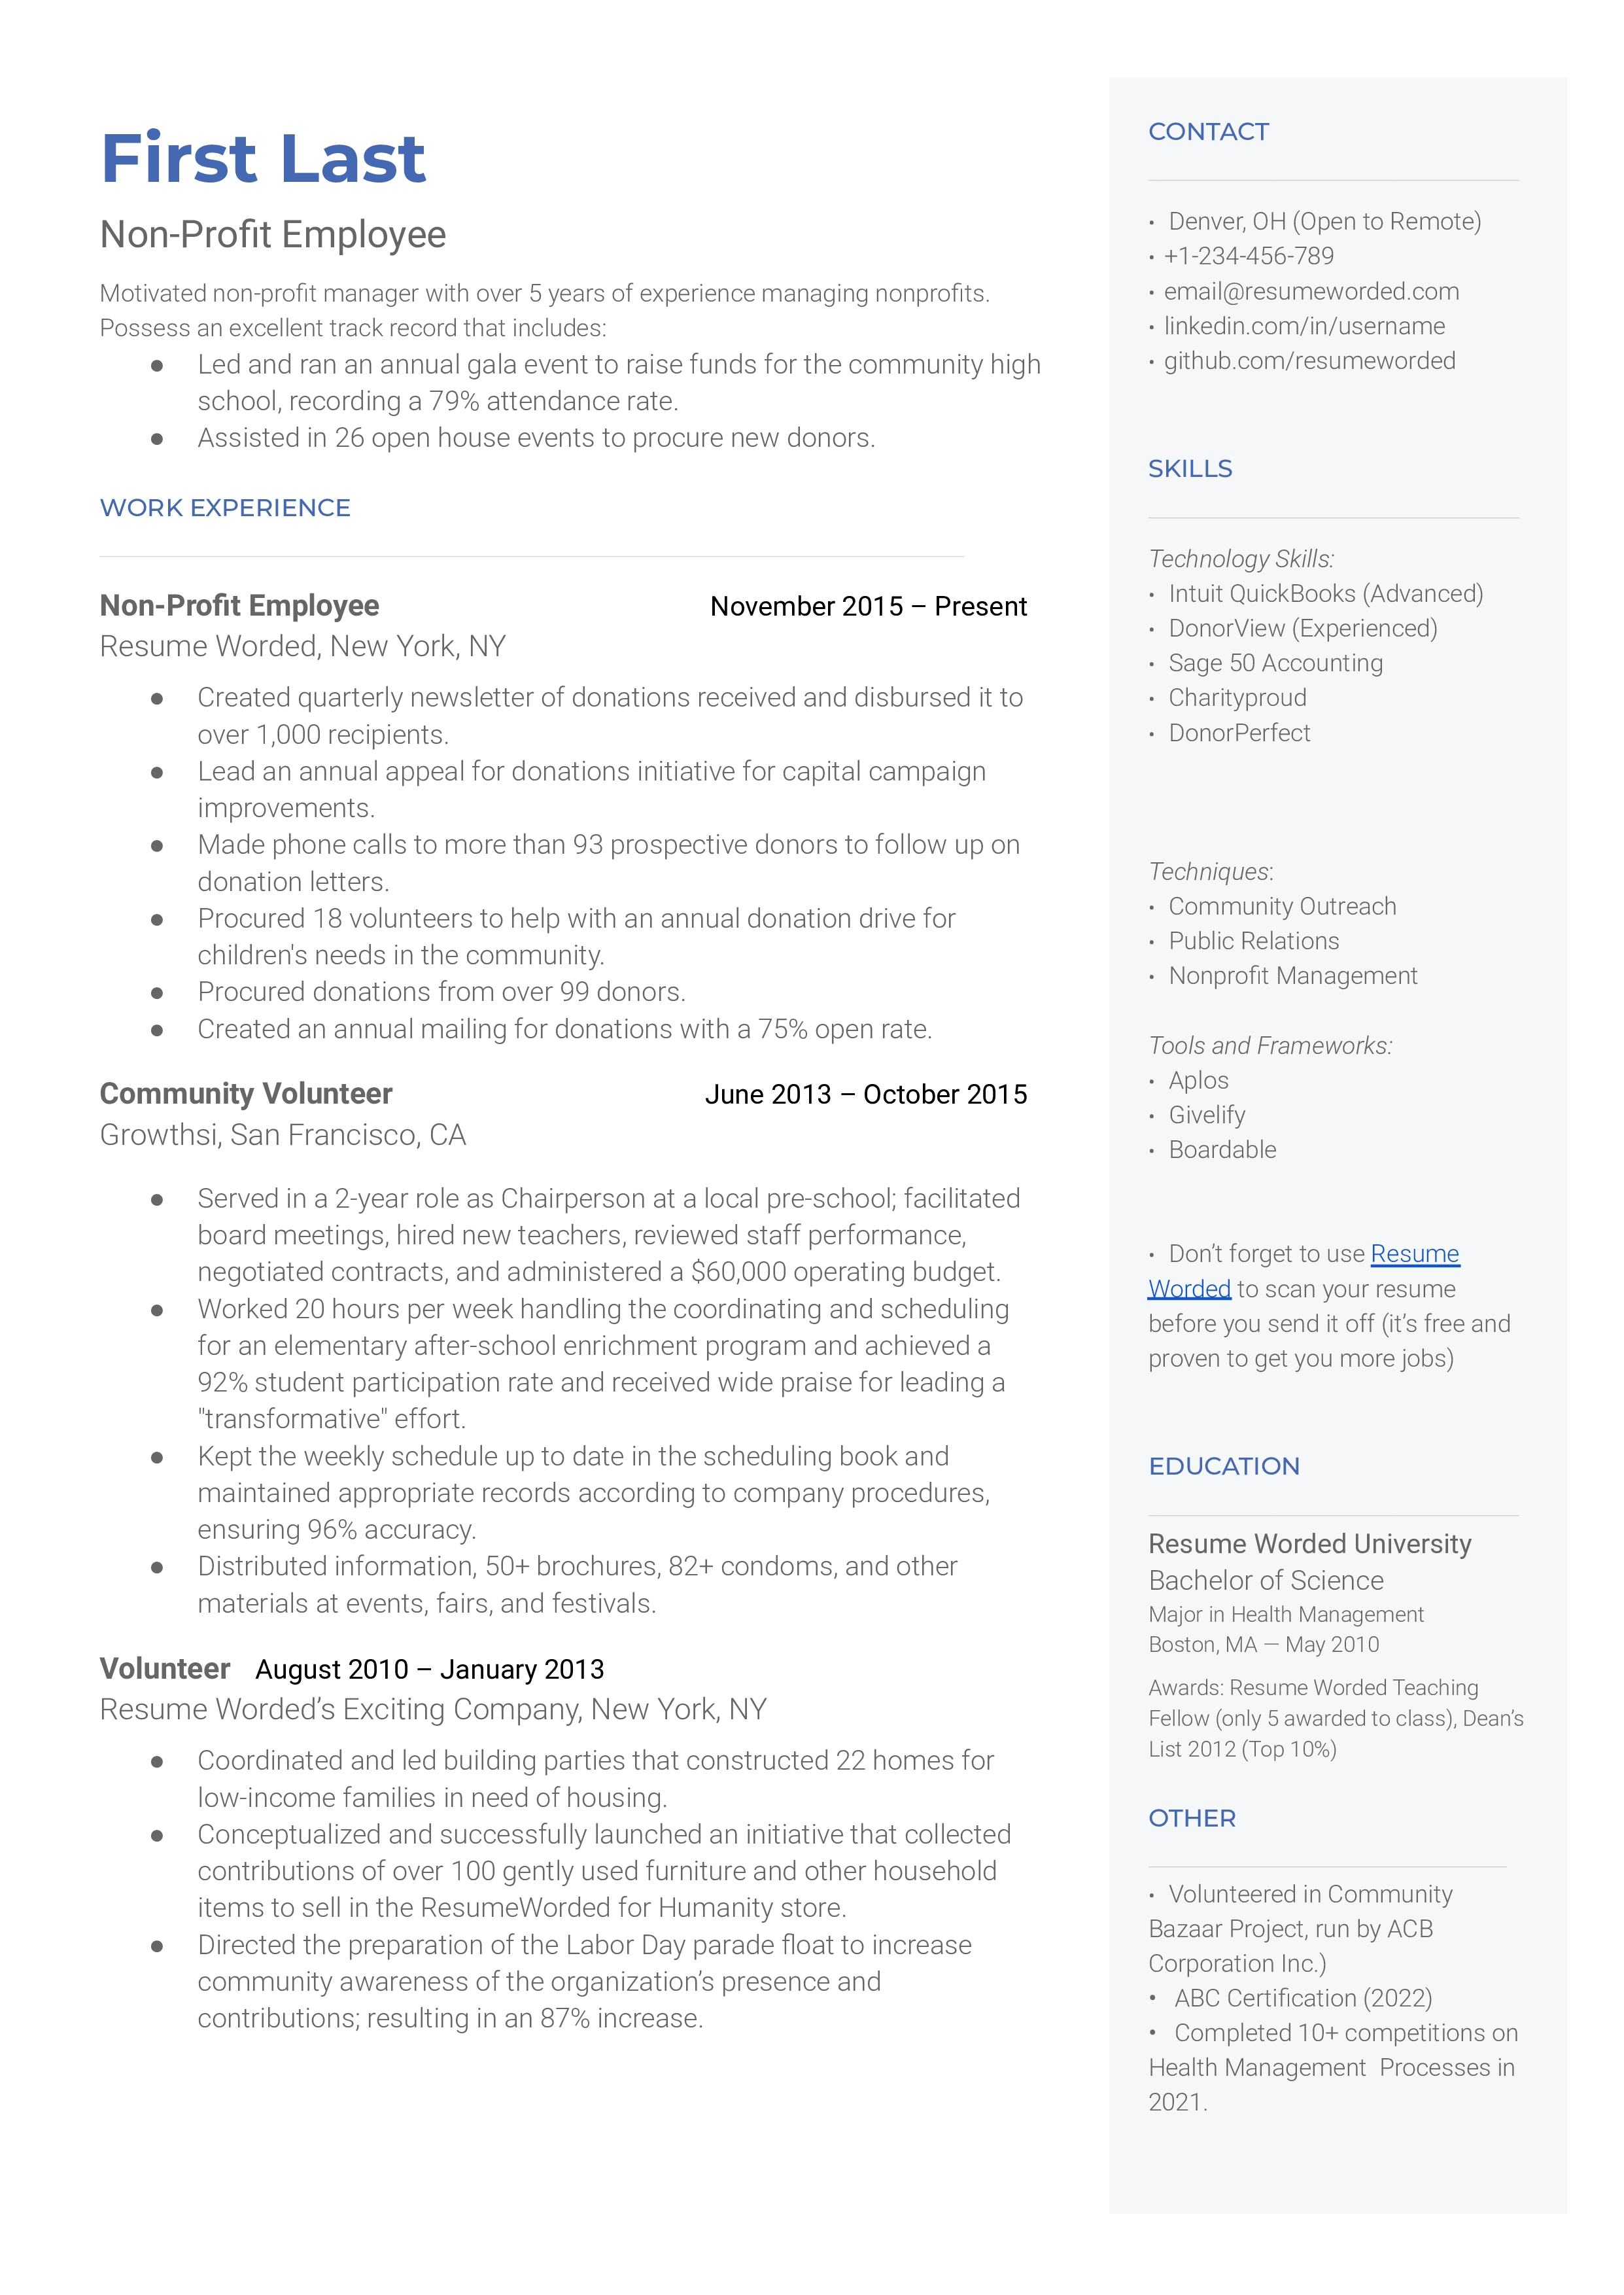 Non-profit employee resume sample that highlights the applicant’s skills and certification.